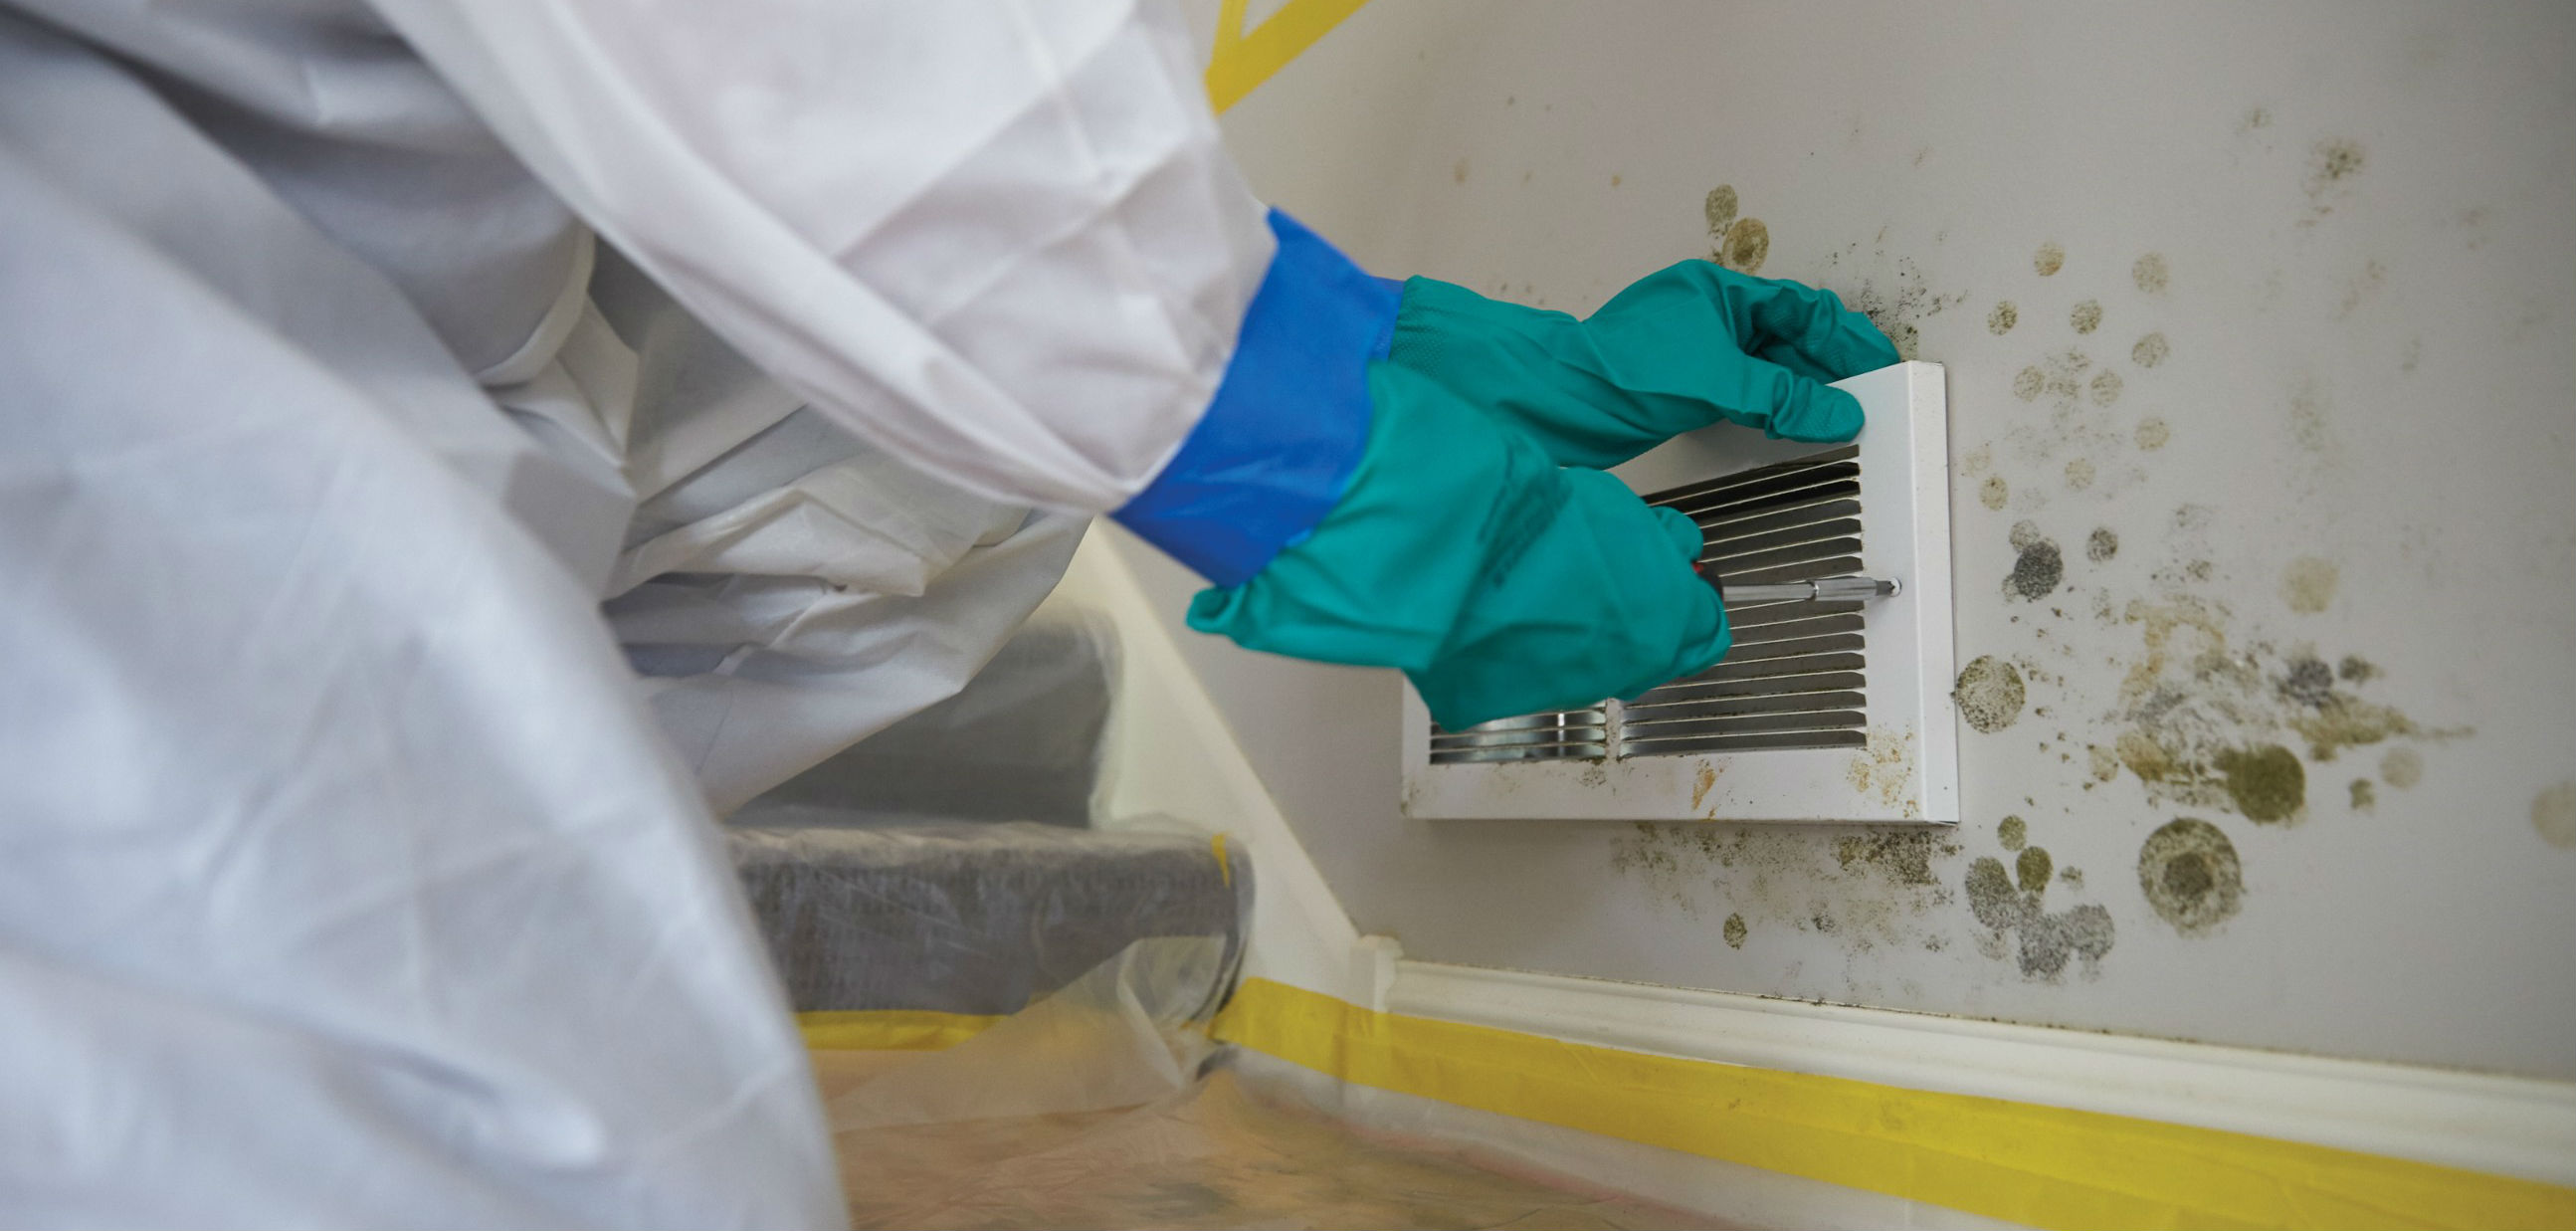 Only Certified Professionals Should Provide Mold Remediation Services